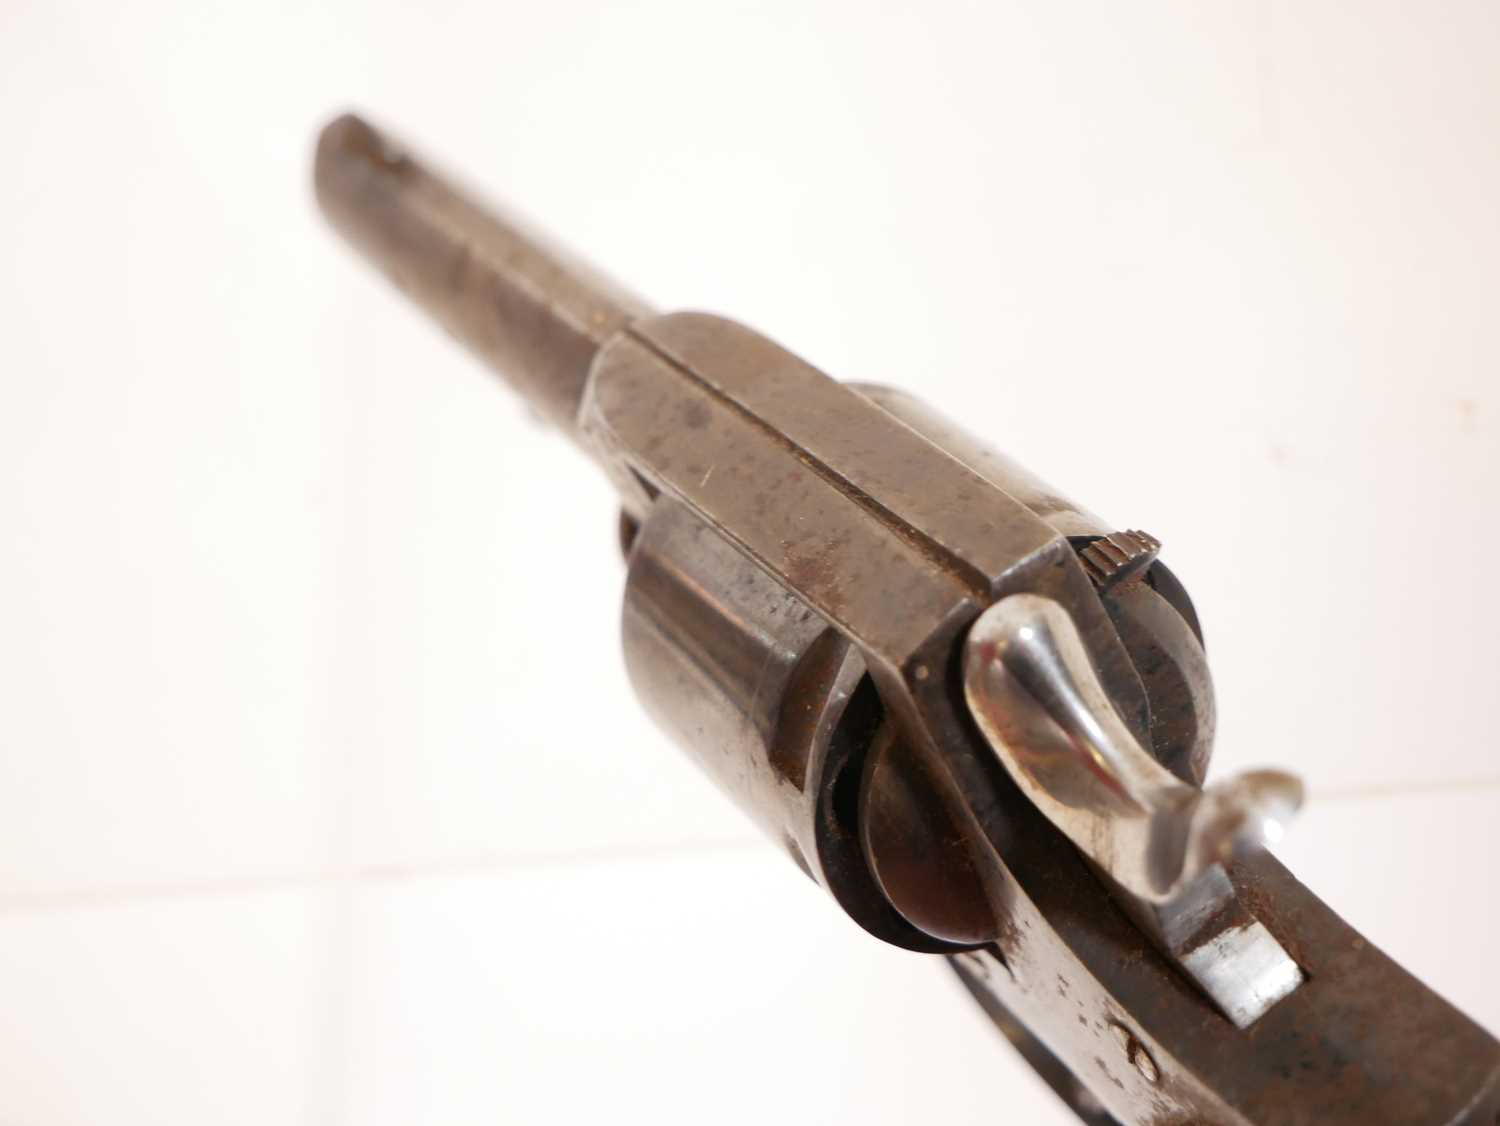 Belgian 7.5mm revolver, no serial number, 2.5 inch sighted barrel, chequered wood grips the grip - Image 6 of 7